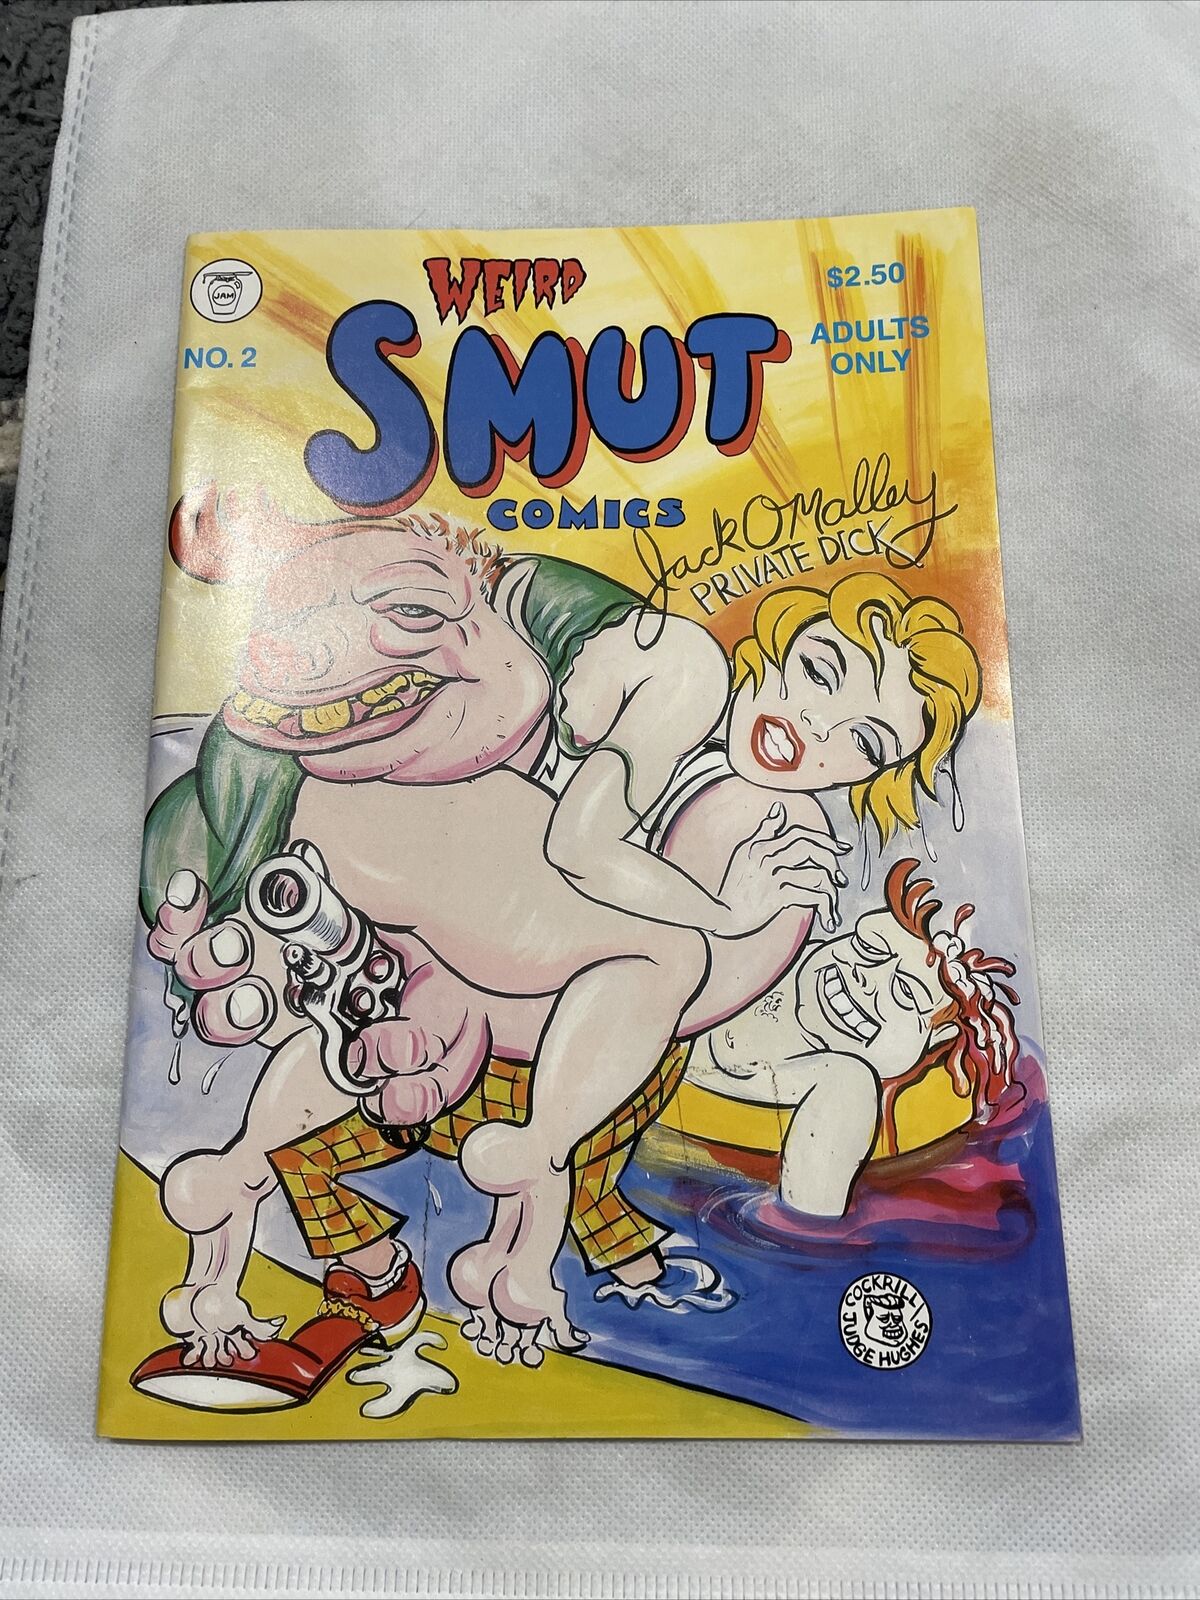 Weird Smut Comics No. 2 - hilarity with a twist from Broklyn in the late 80s